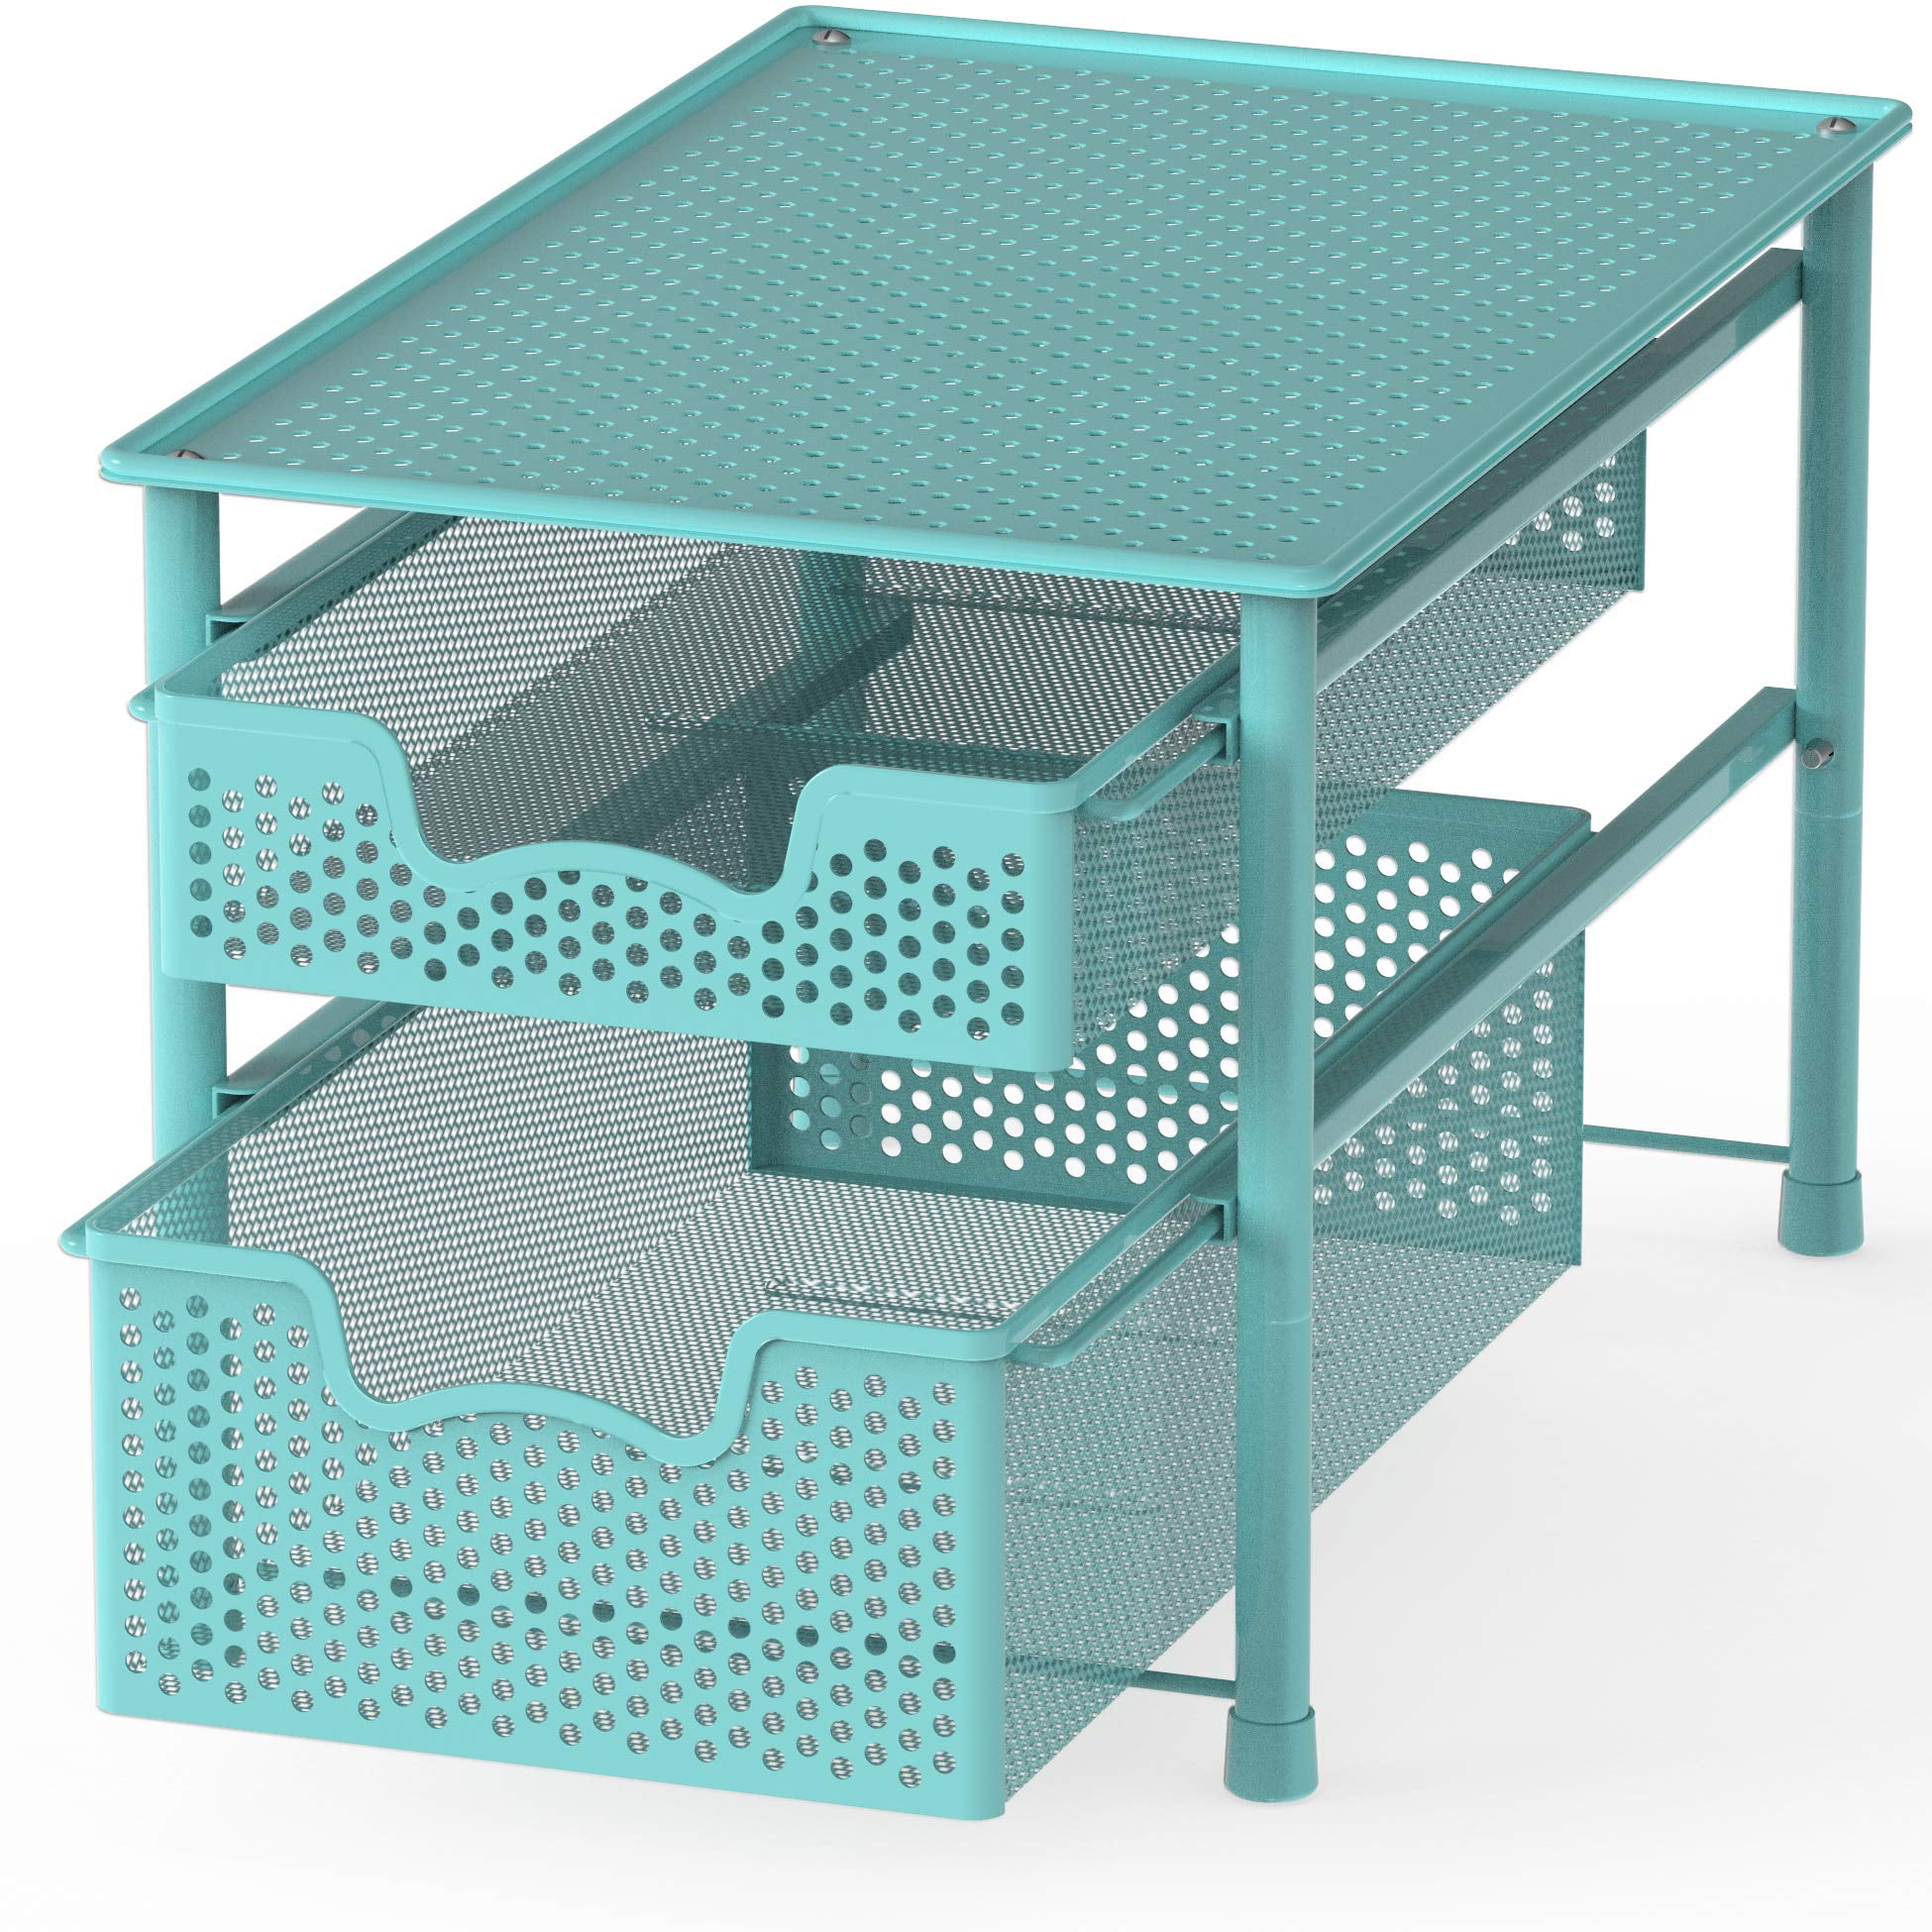  Xicennego Stackable 2-Tier Sliding Storage Drawer